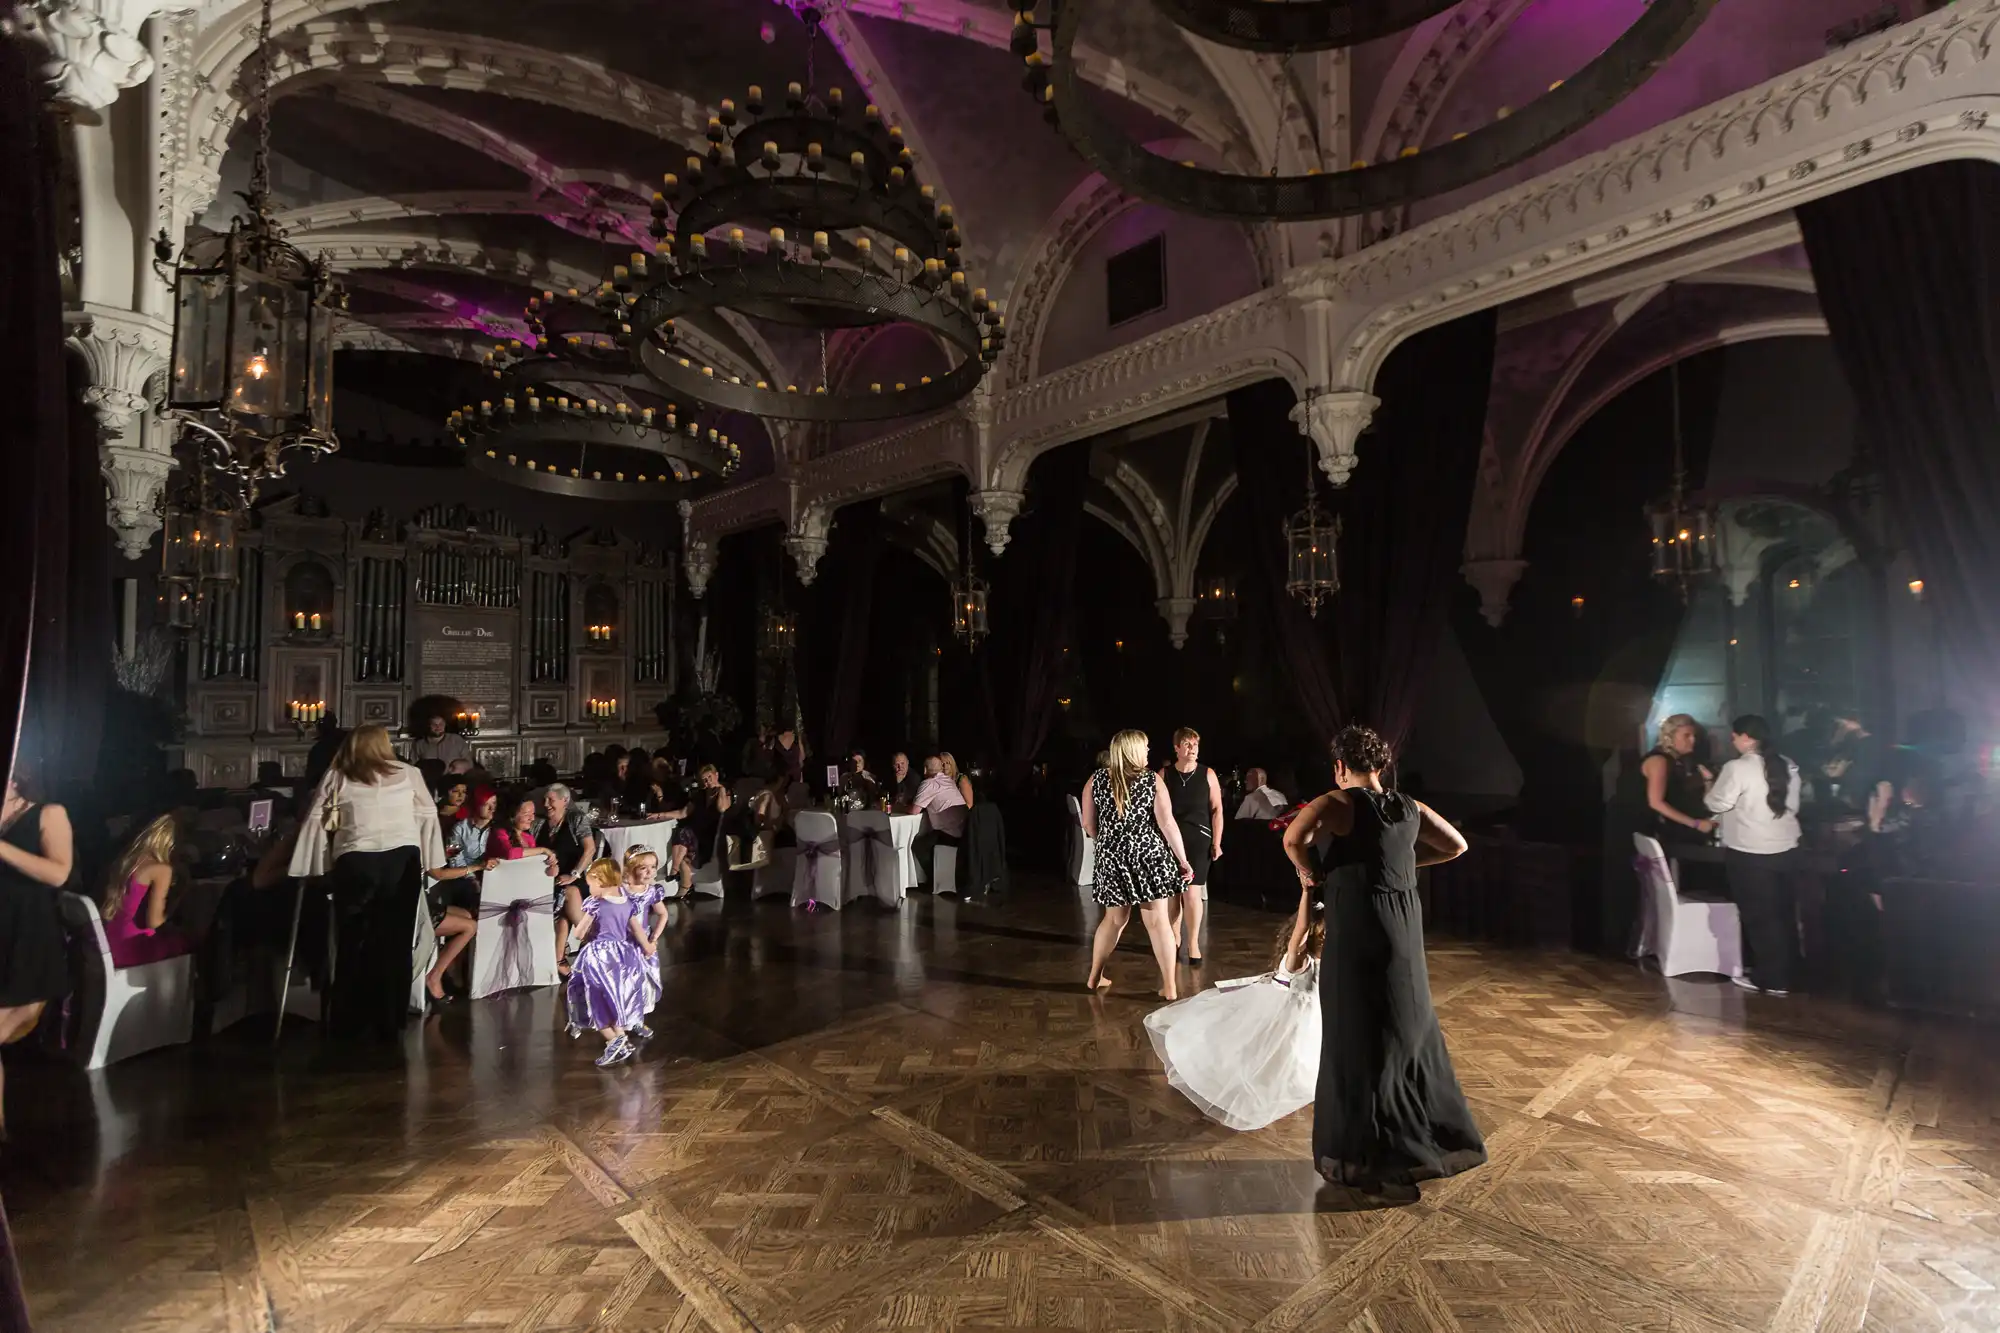 Elegant ballroom with guests dancing under dim, warm lighting and a classic architectural backdrop with arched ceilings and intricate details.